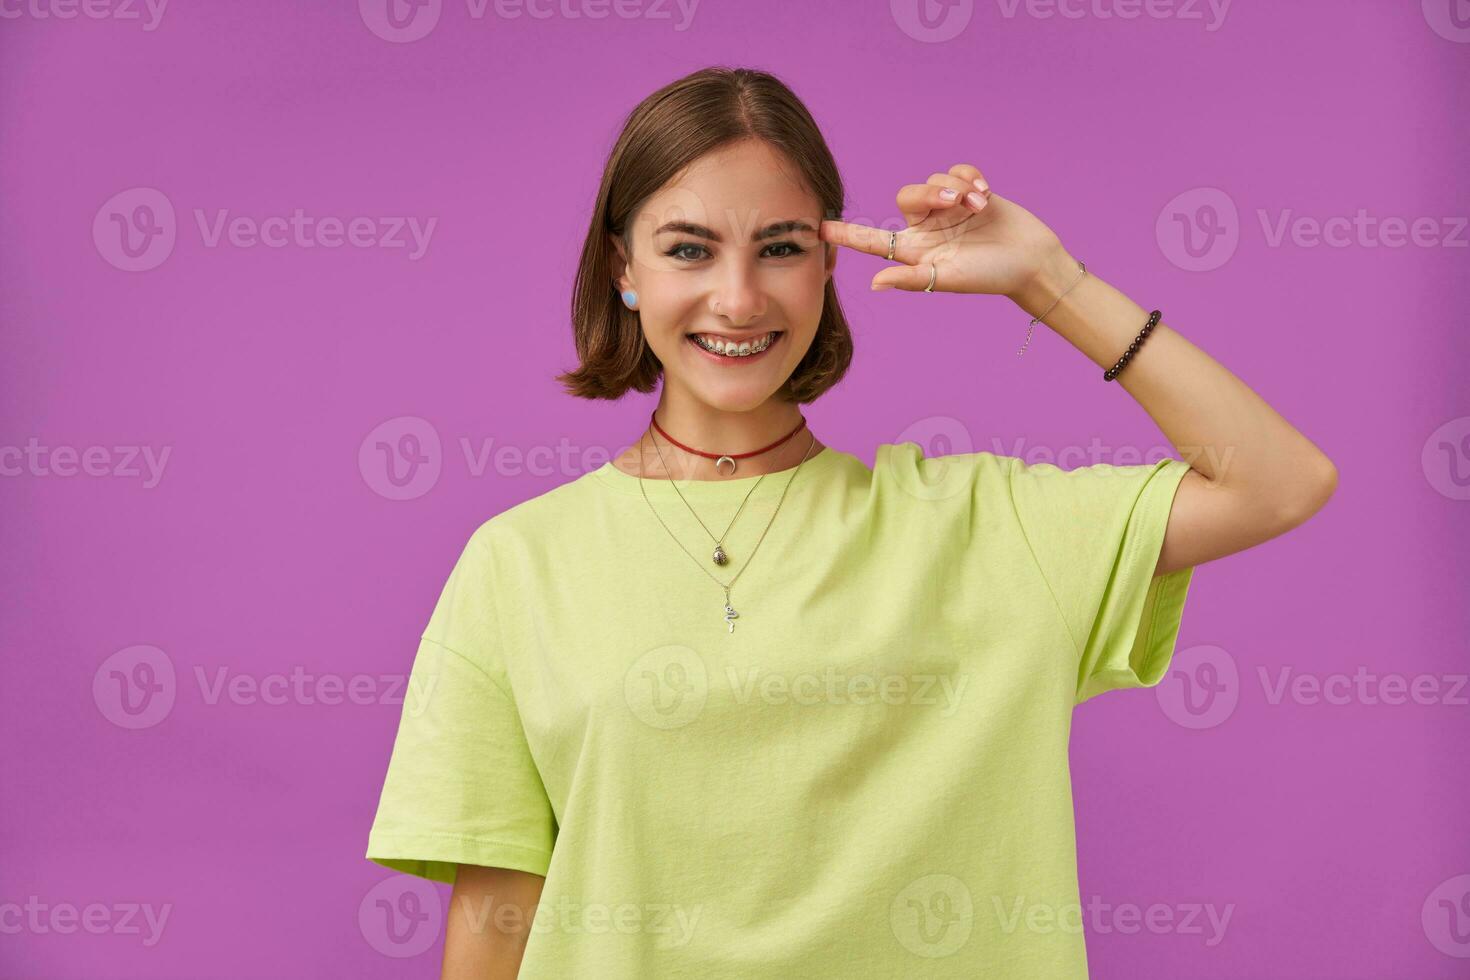 Teenage girl, cheerful and happy, with brunette short hair. Holding a finger next to her temple. Standing over purple background. Wearing green t-shirt, teeth braces, necklace, bracelets and rings photo